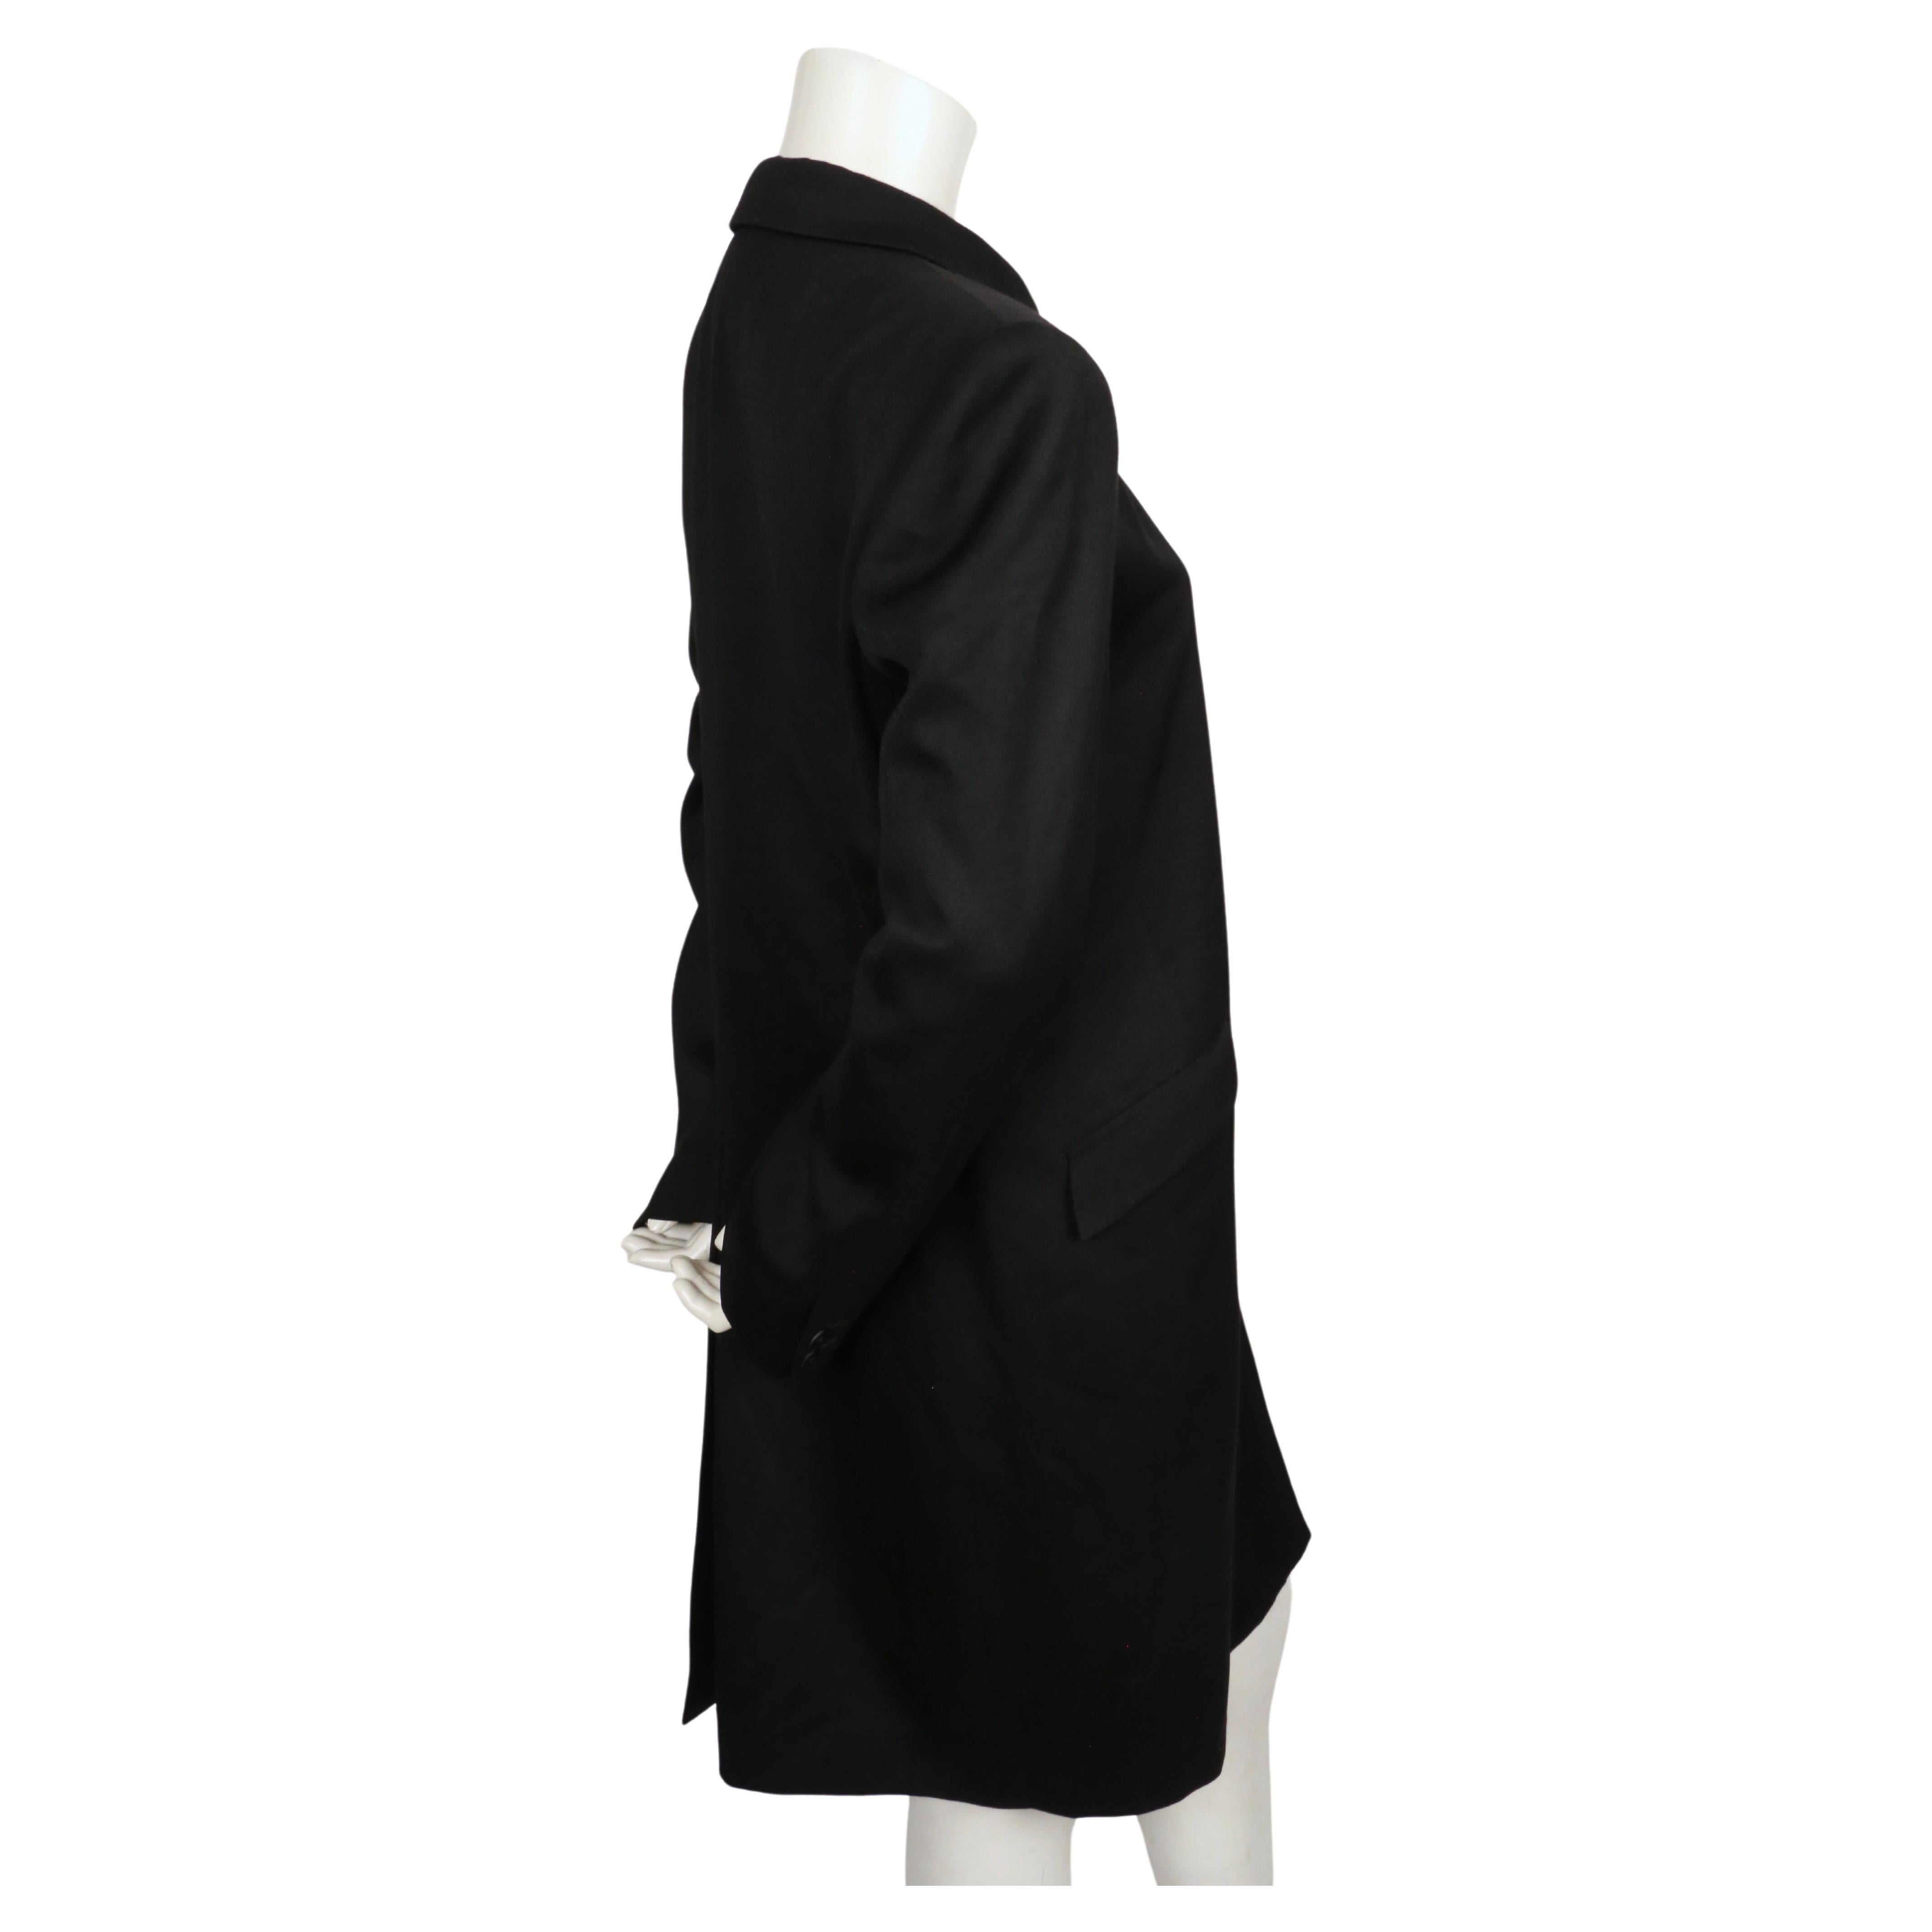 Women's 1980's STEPHEN SPROUSE black jacket with oversized shoulders For Sale